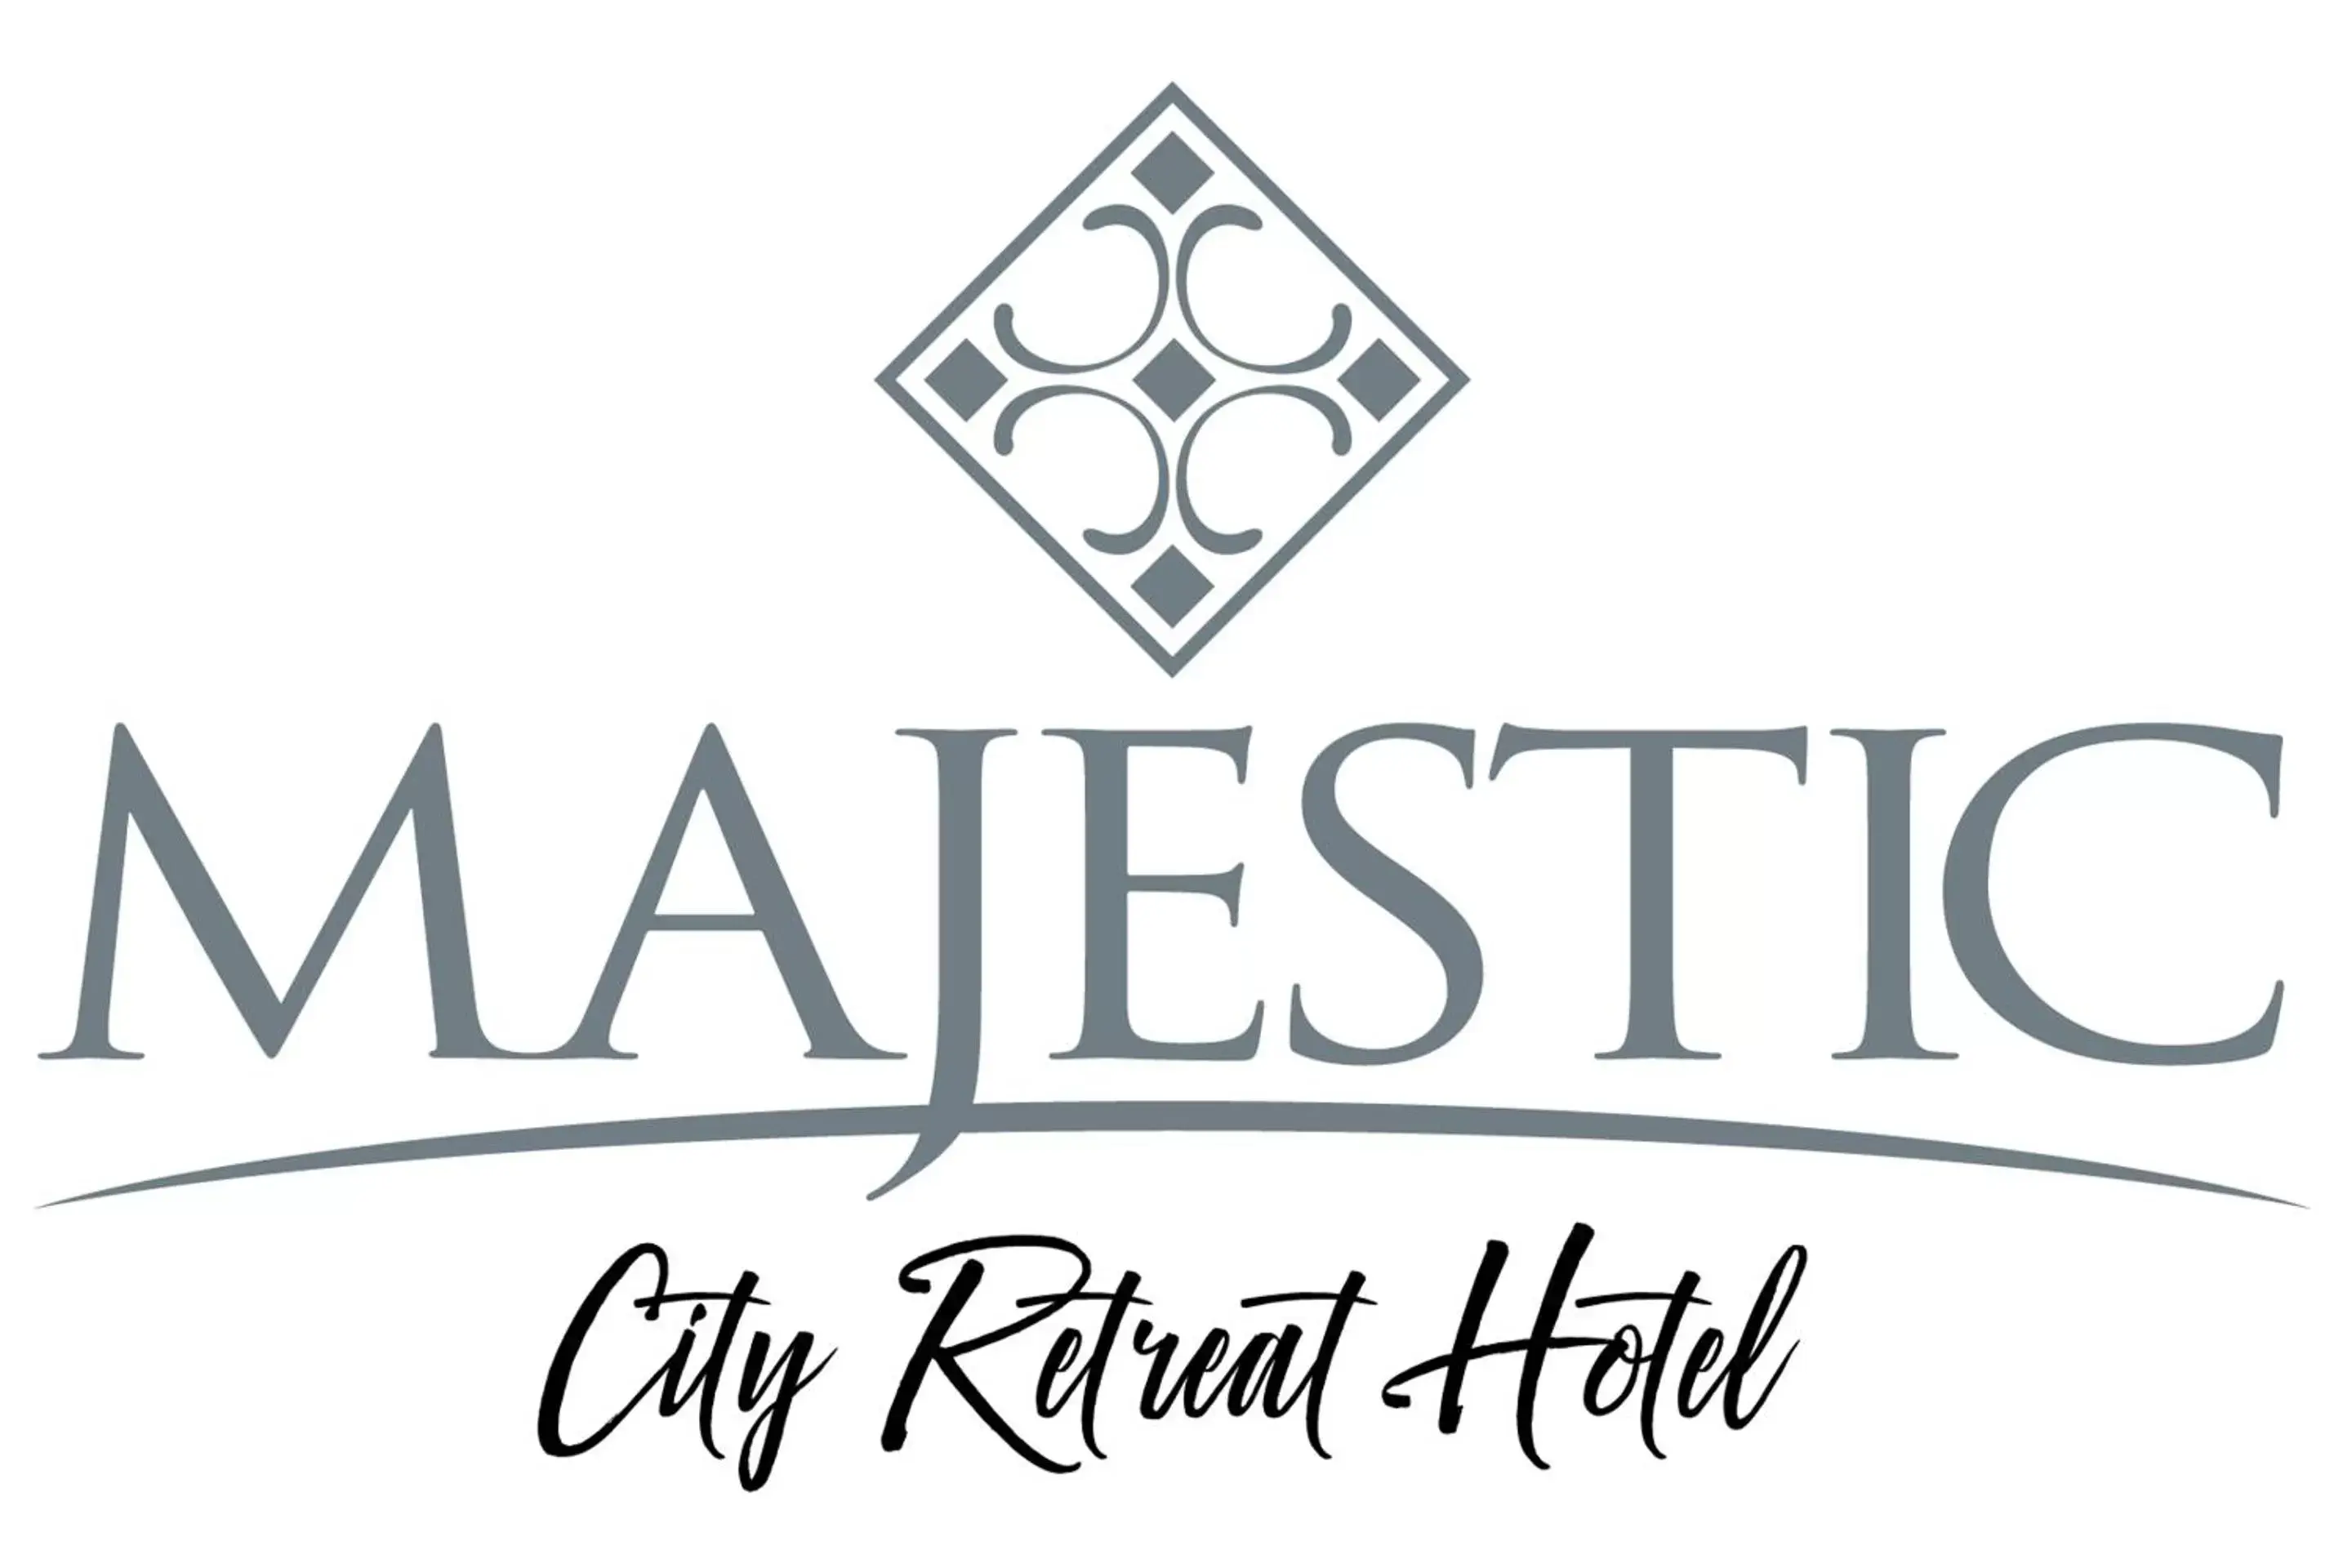 Property logo or sign, Property Logo/Sign in Majestic City Retreat Hotel